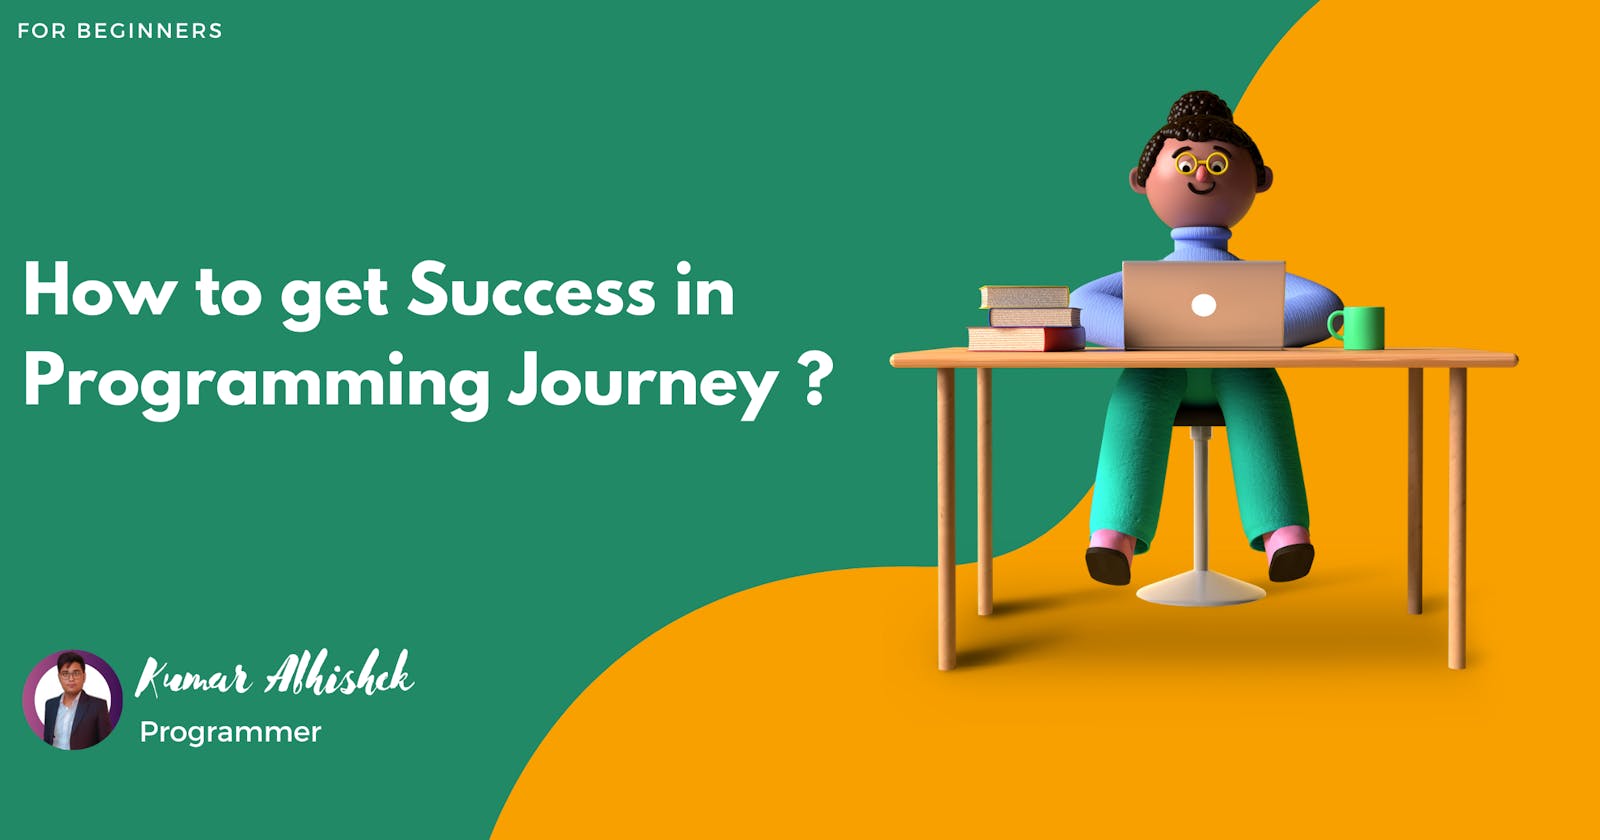 How to get success in Programming Journey?